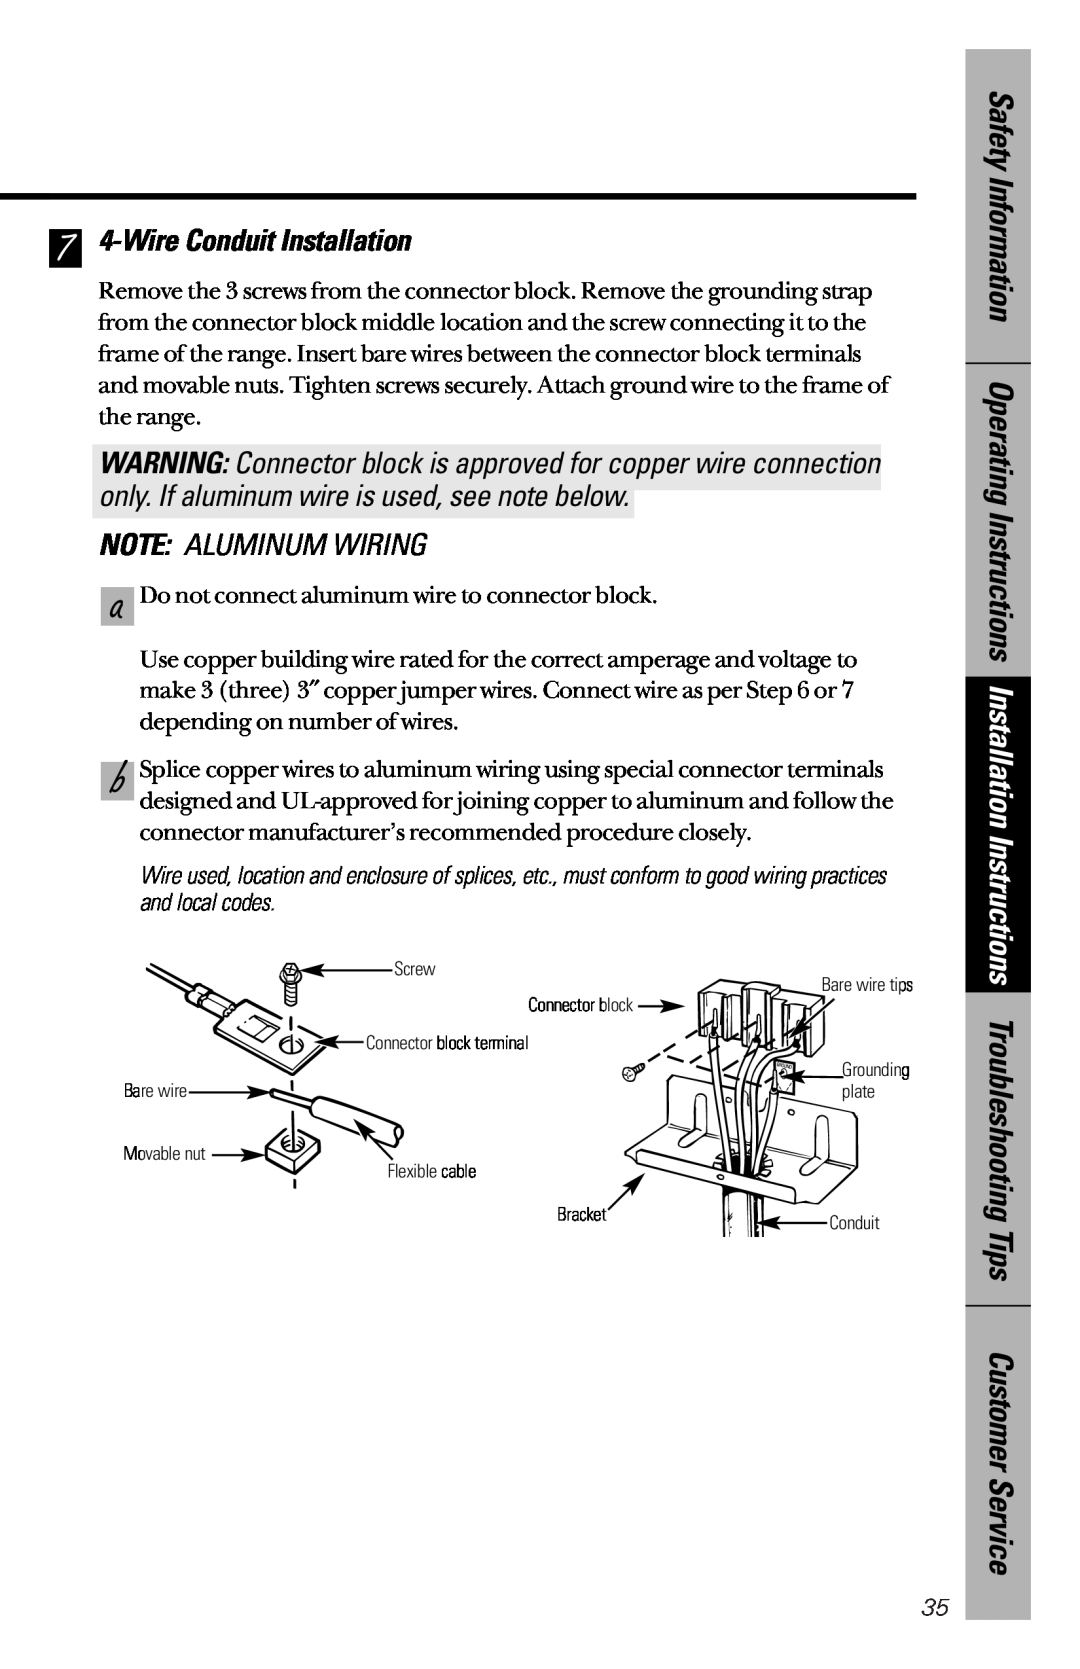 GE 164D3333P172 owner manual 7 4-WireConduit Installation, Note Aluminum Wiring, and local codes 